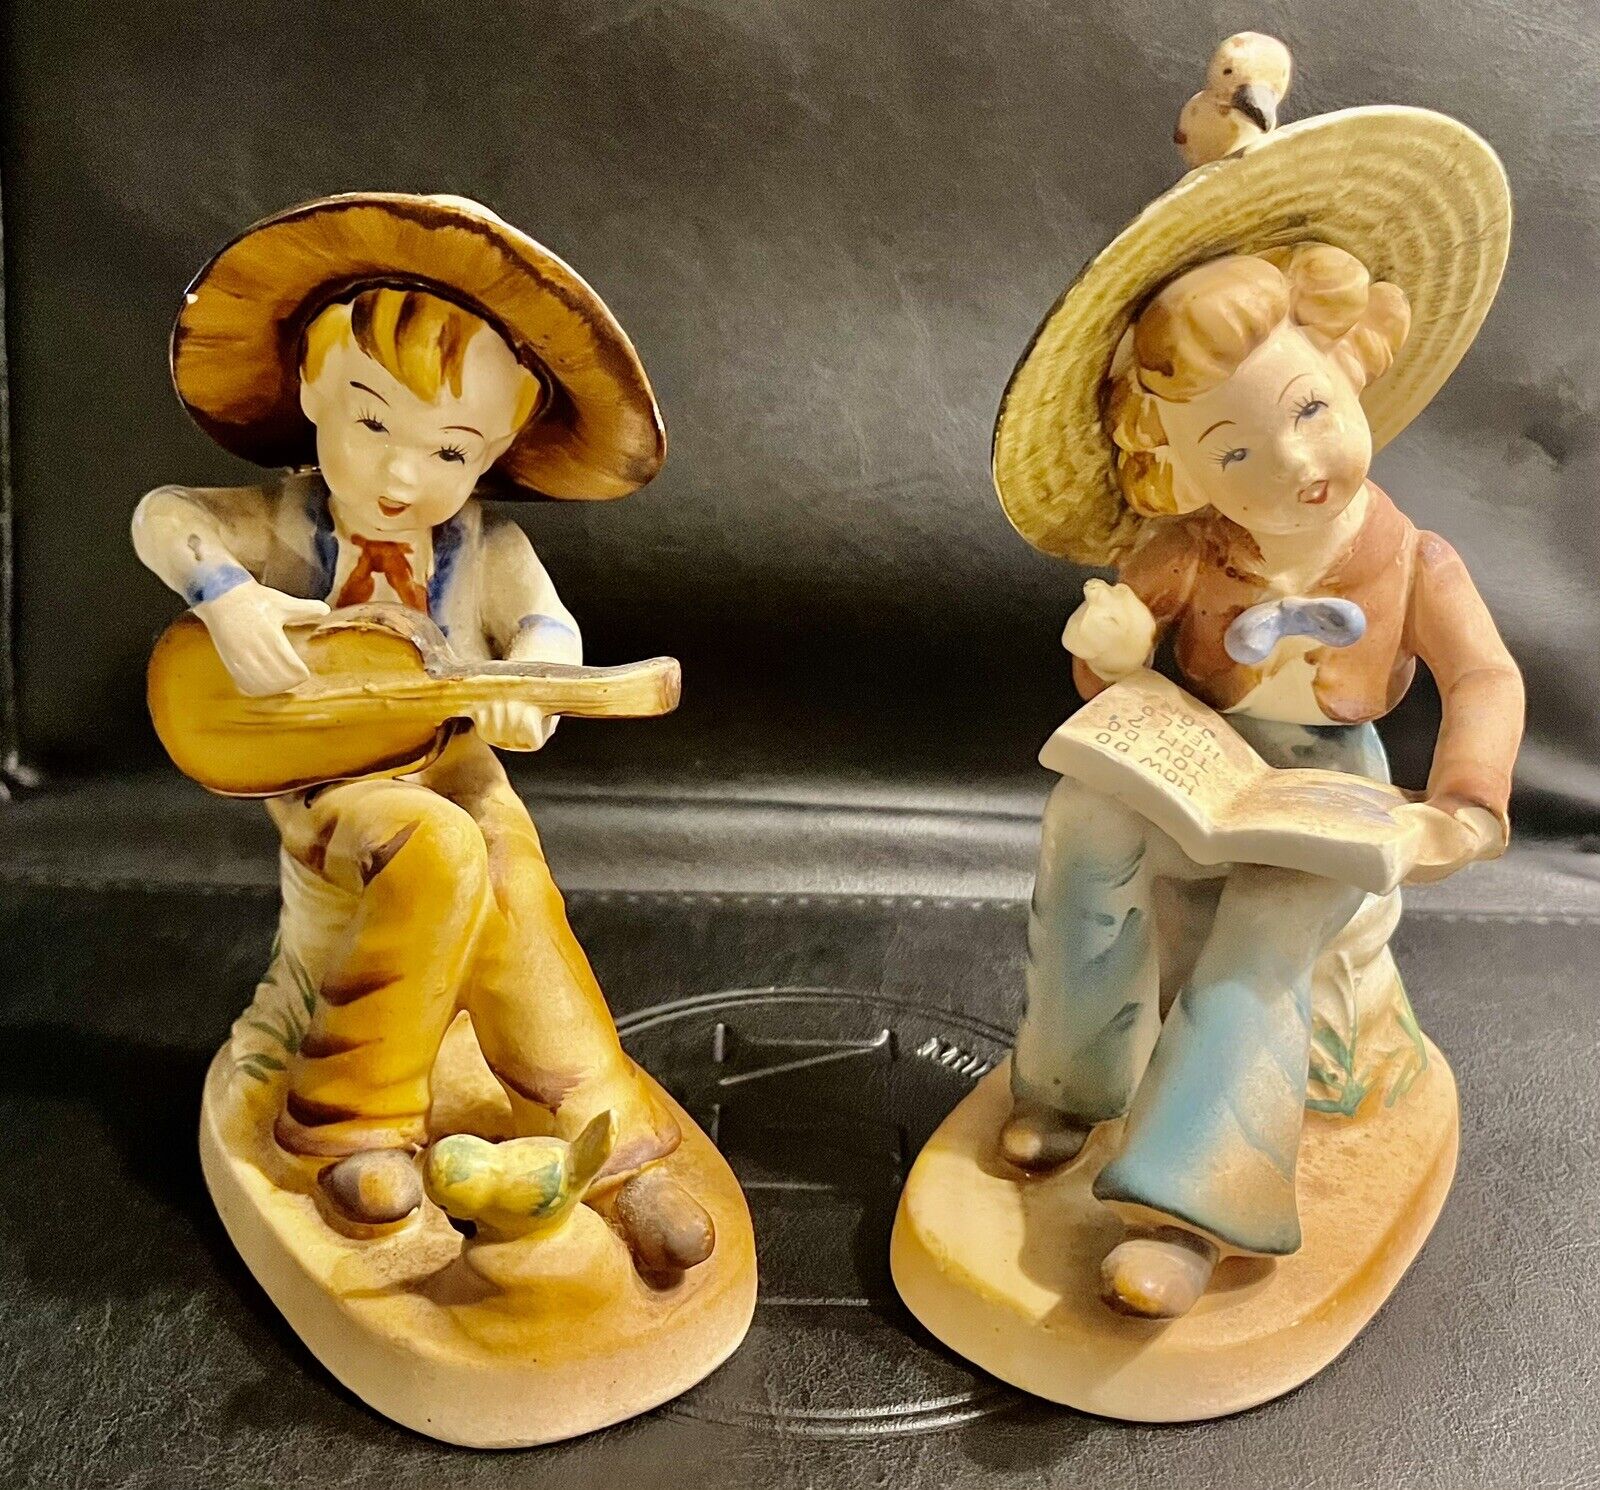 Rare Pair of Occupied Japan 5” Figurines - Girl with a Book and Boy With  Guitar